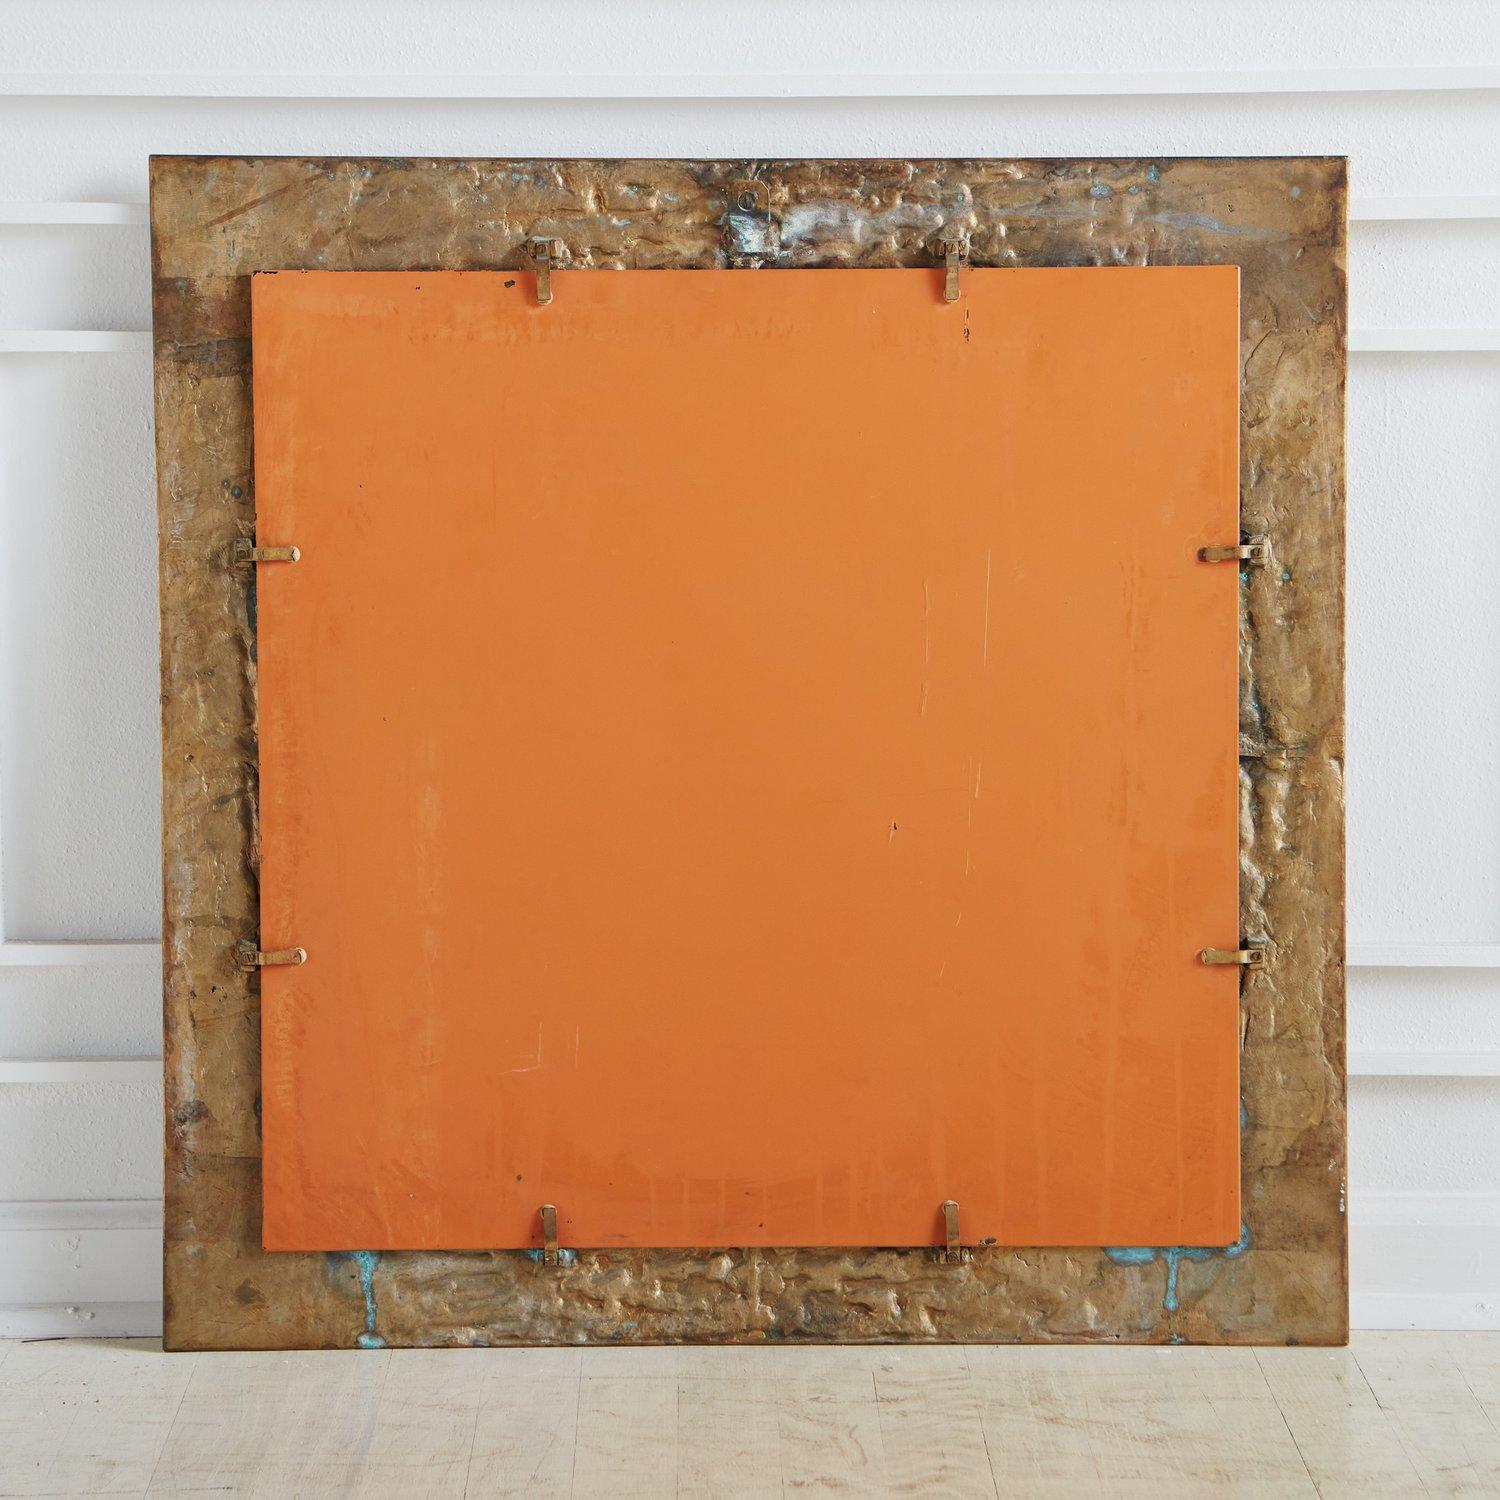 Italian Brutalist Square Brass Frame Mirror Attributed to Luciano Frigerio, Italy 1970s For Sale